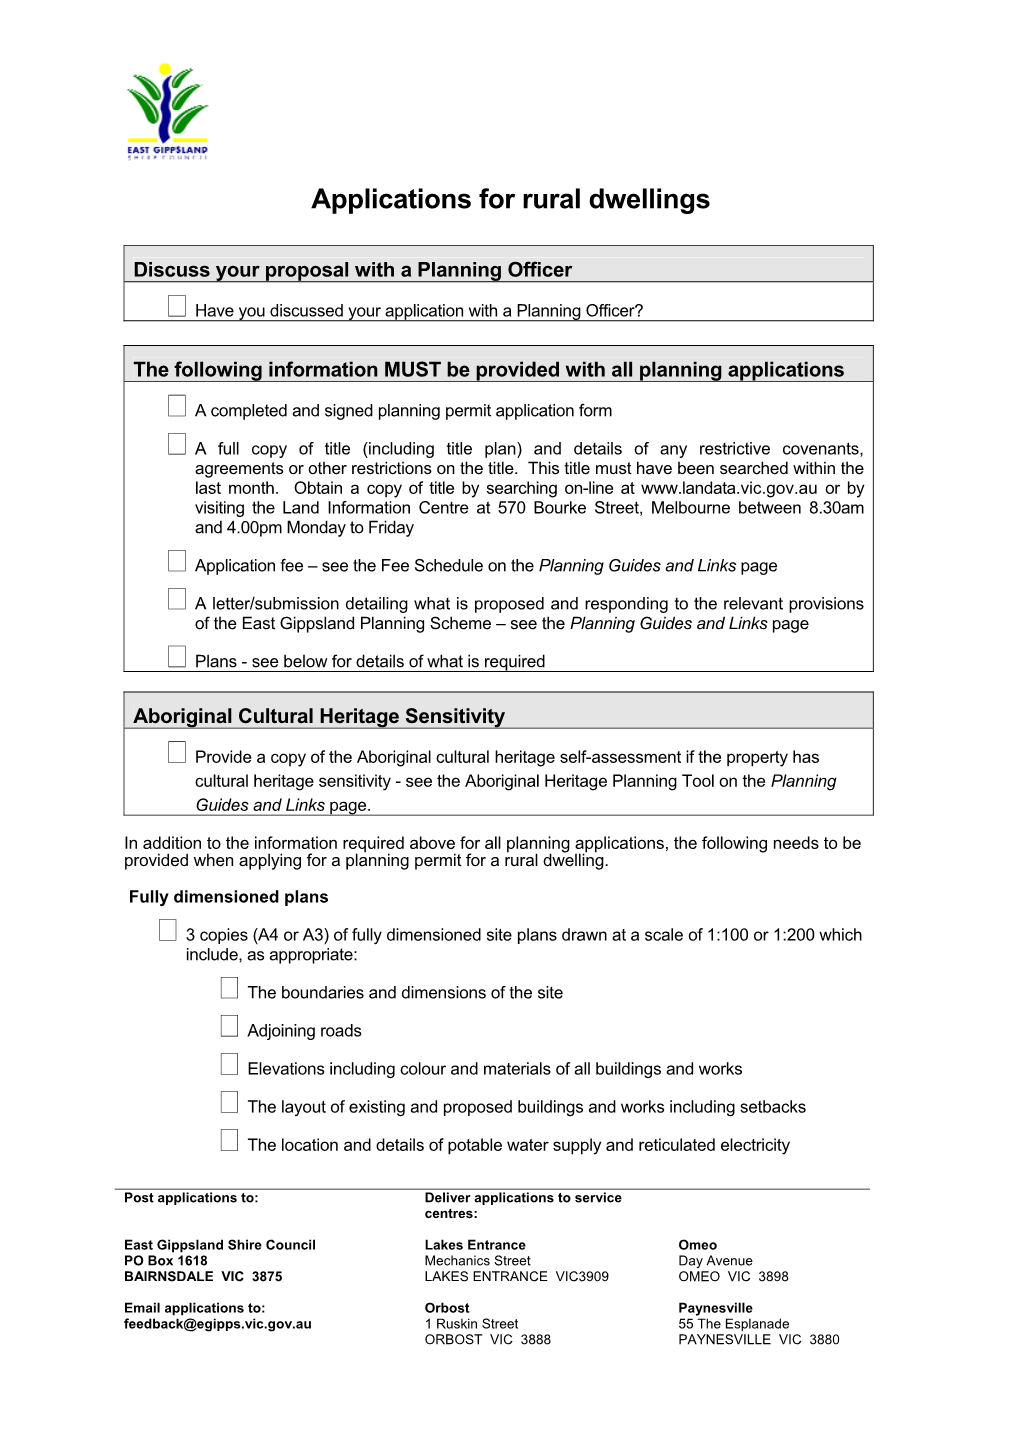 Applications for Rural Dwellings